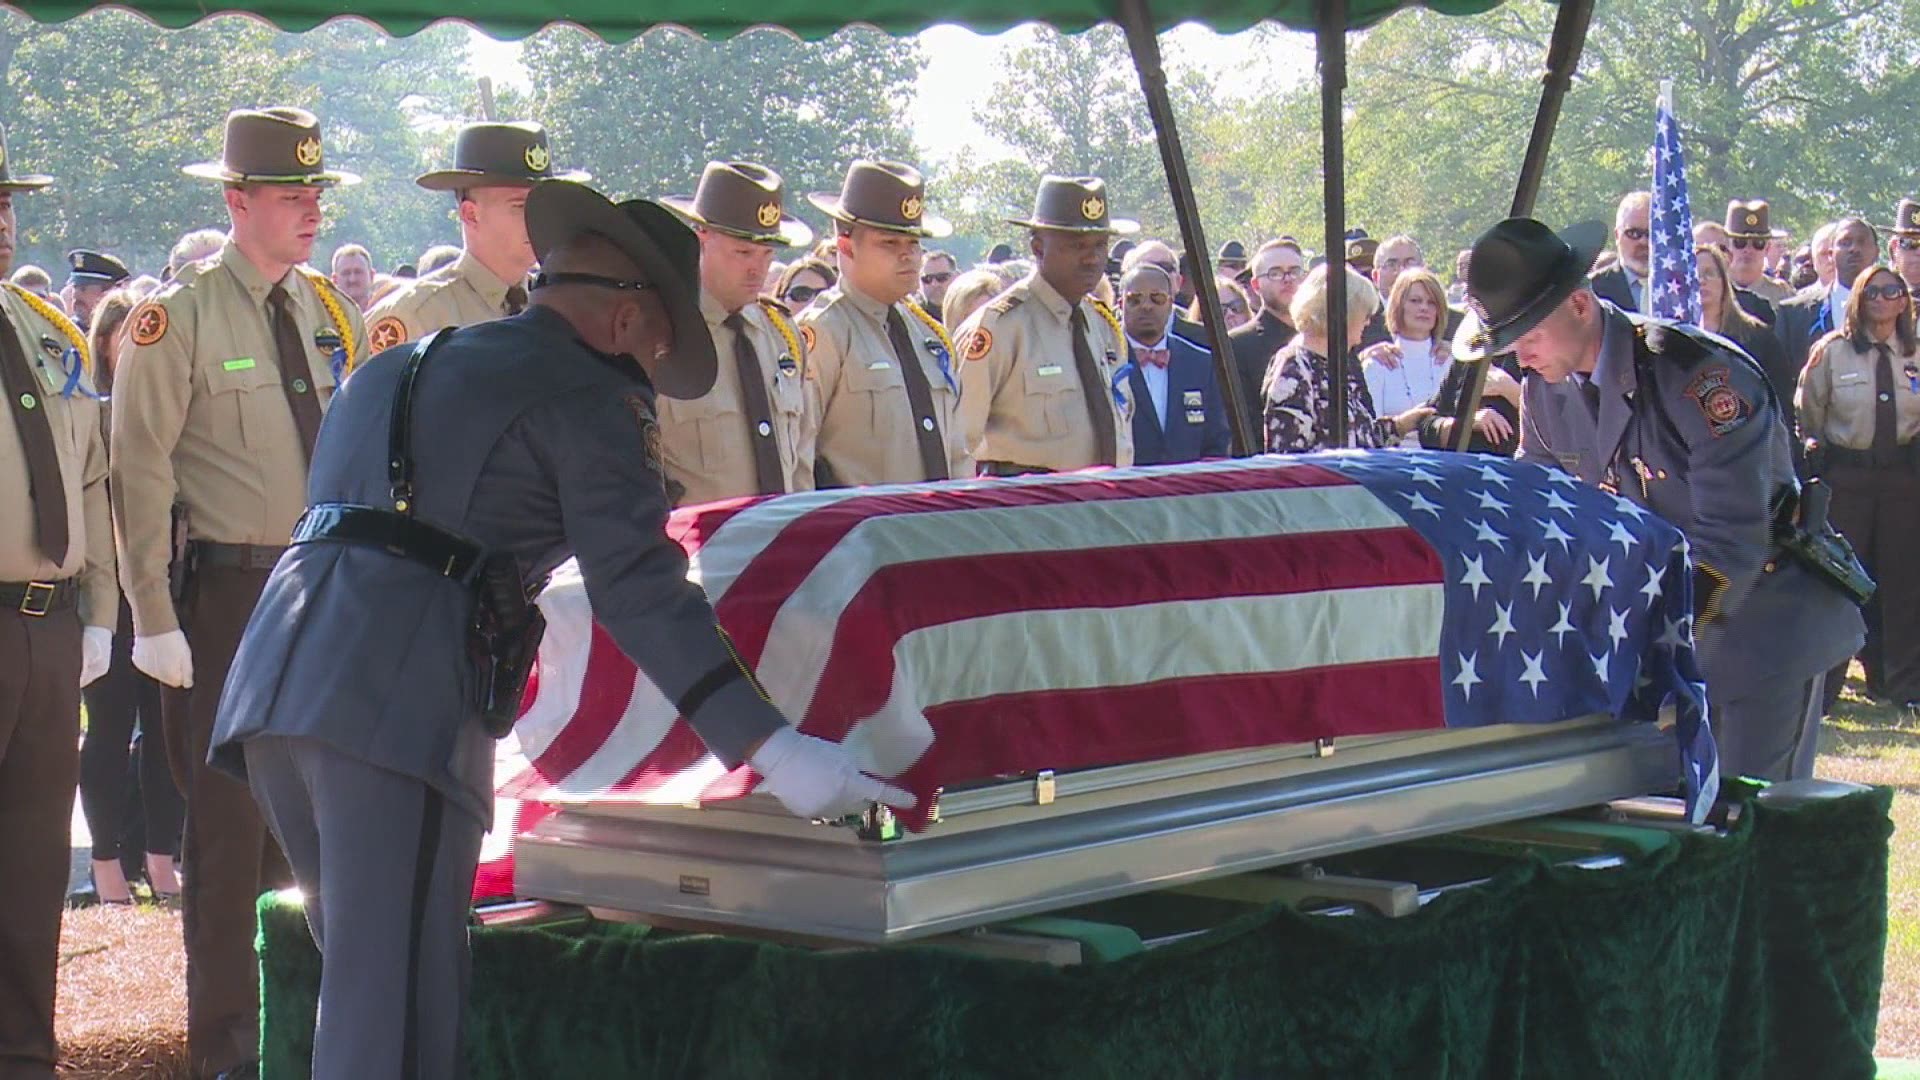 Folding the flag: Guards prepare the flag at Sondron's funeral